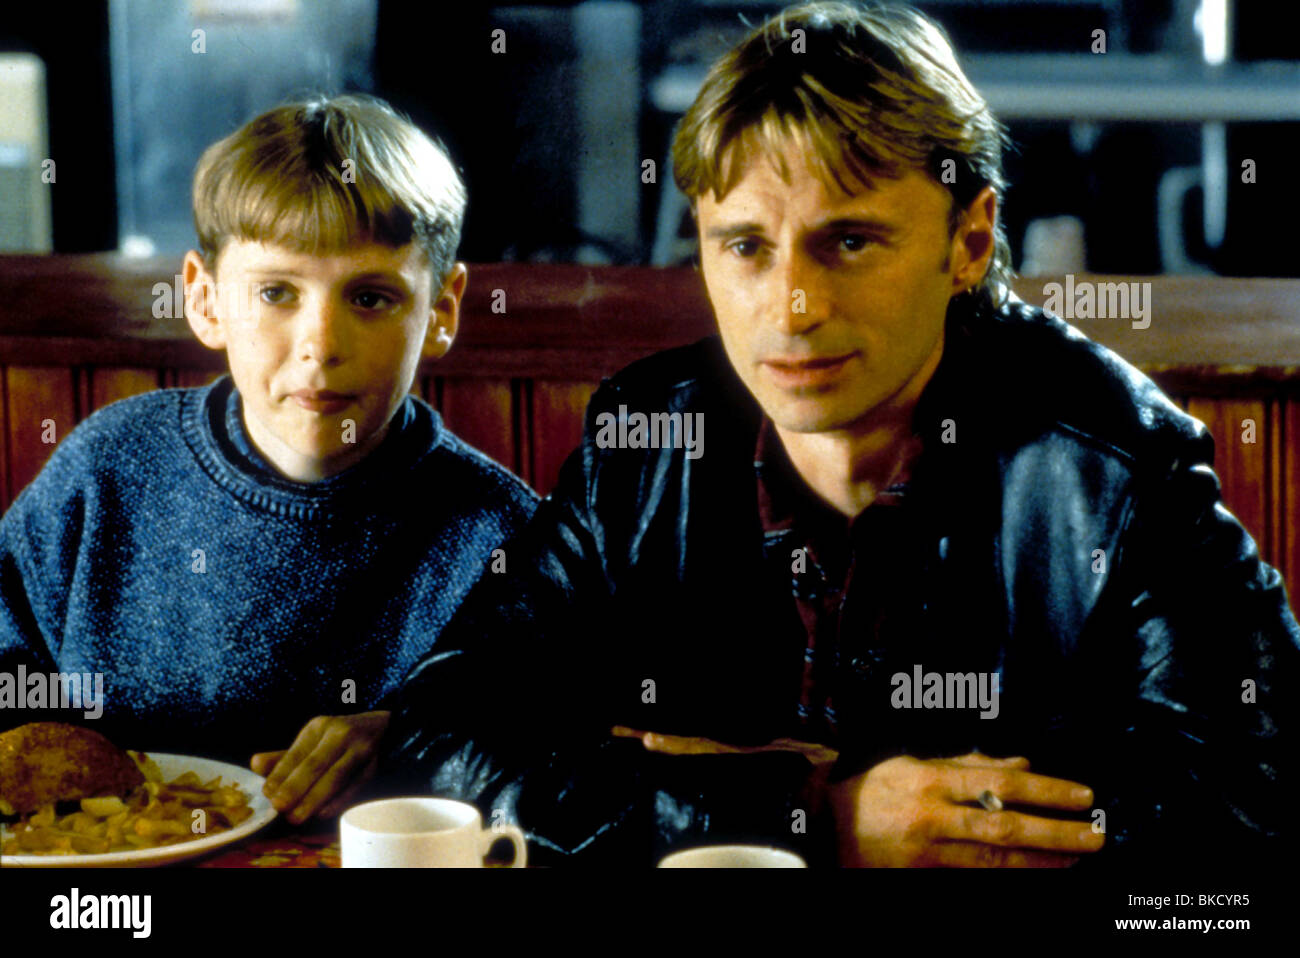 THE FULL MONTY (1997) WILLIAM SNAPE, ROBERT CARLYLE FMY 073 Stock Photo ...